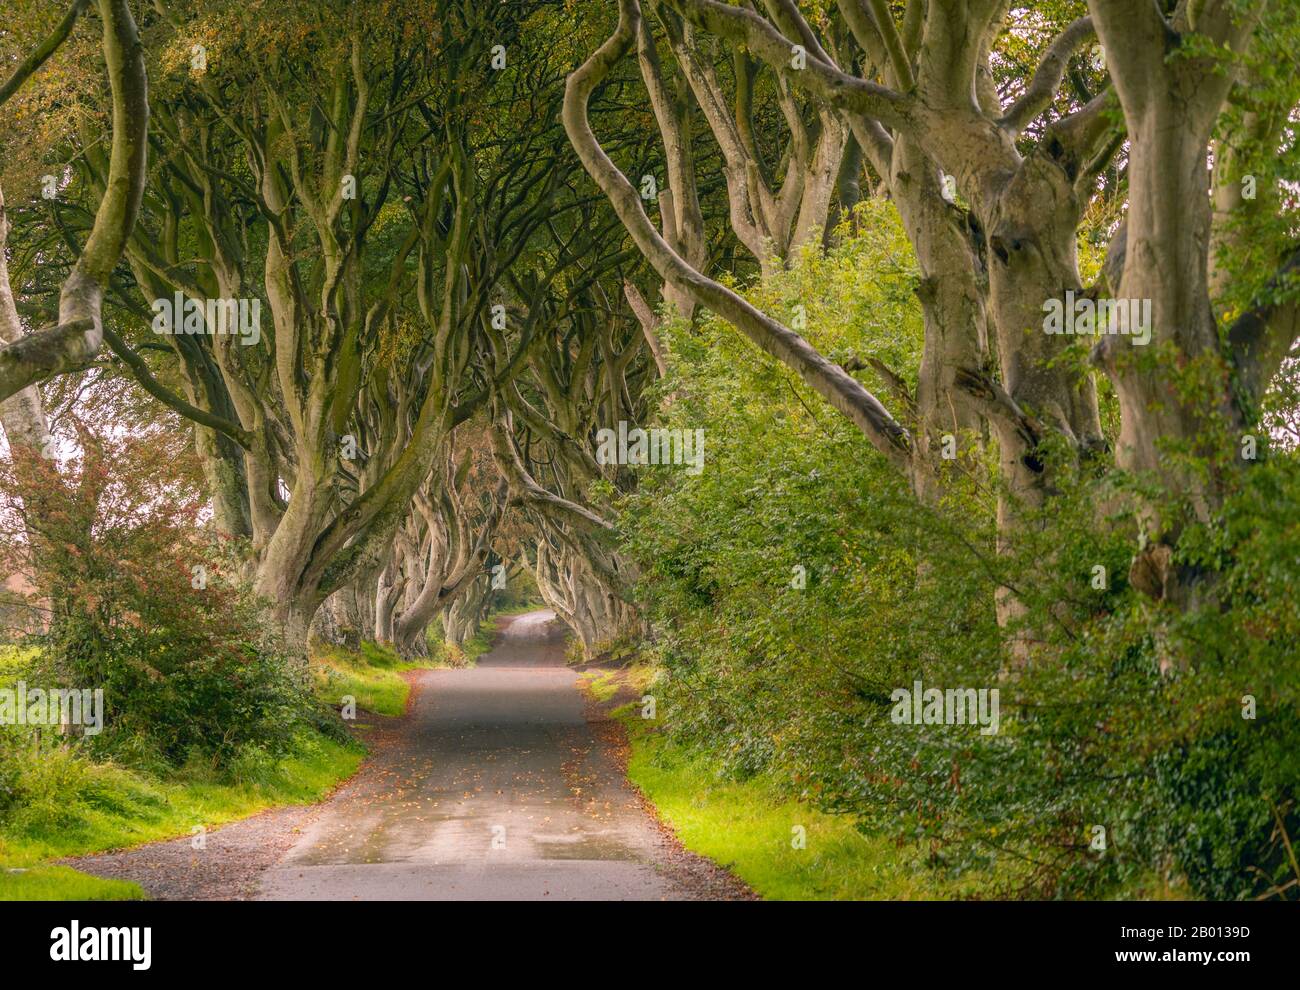 Made famous by The House of Thrones series is the country road lined with the beautiful Beech trees leading up to Gracehill House in Ireland Stock Photo